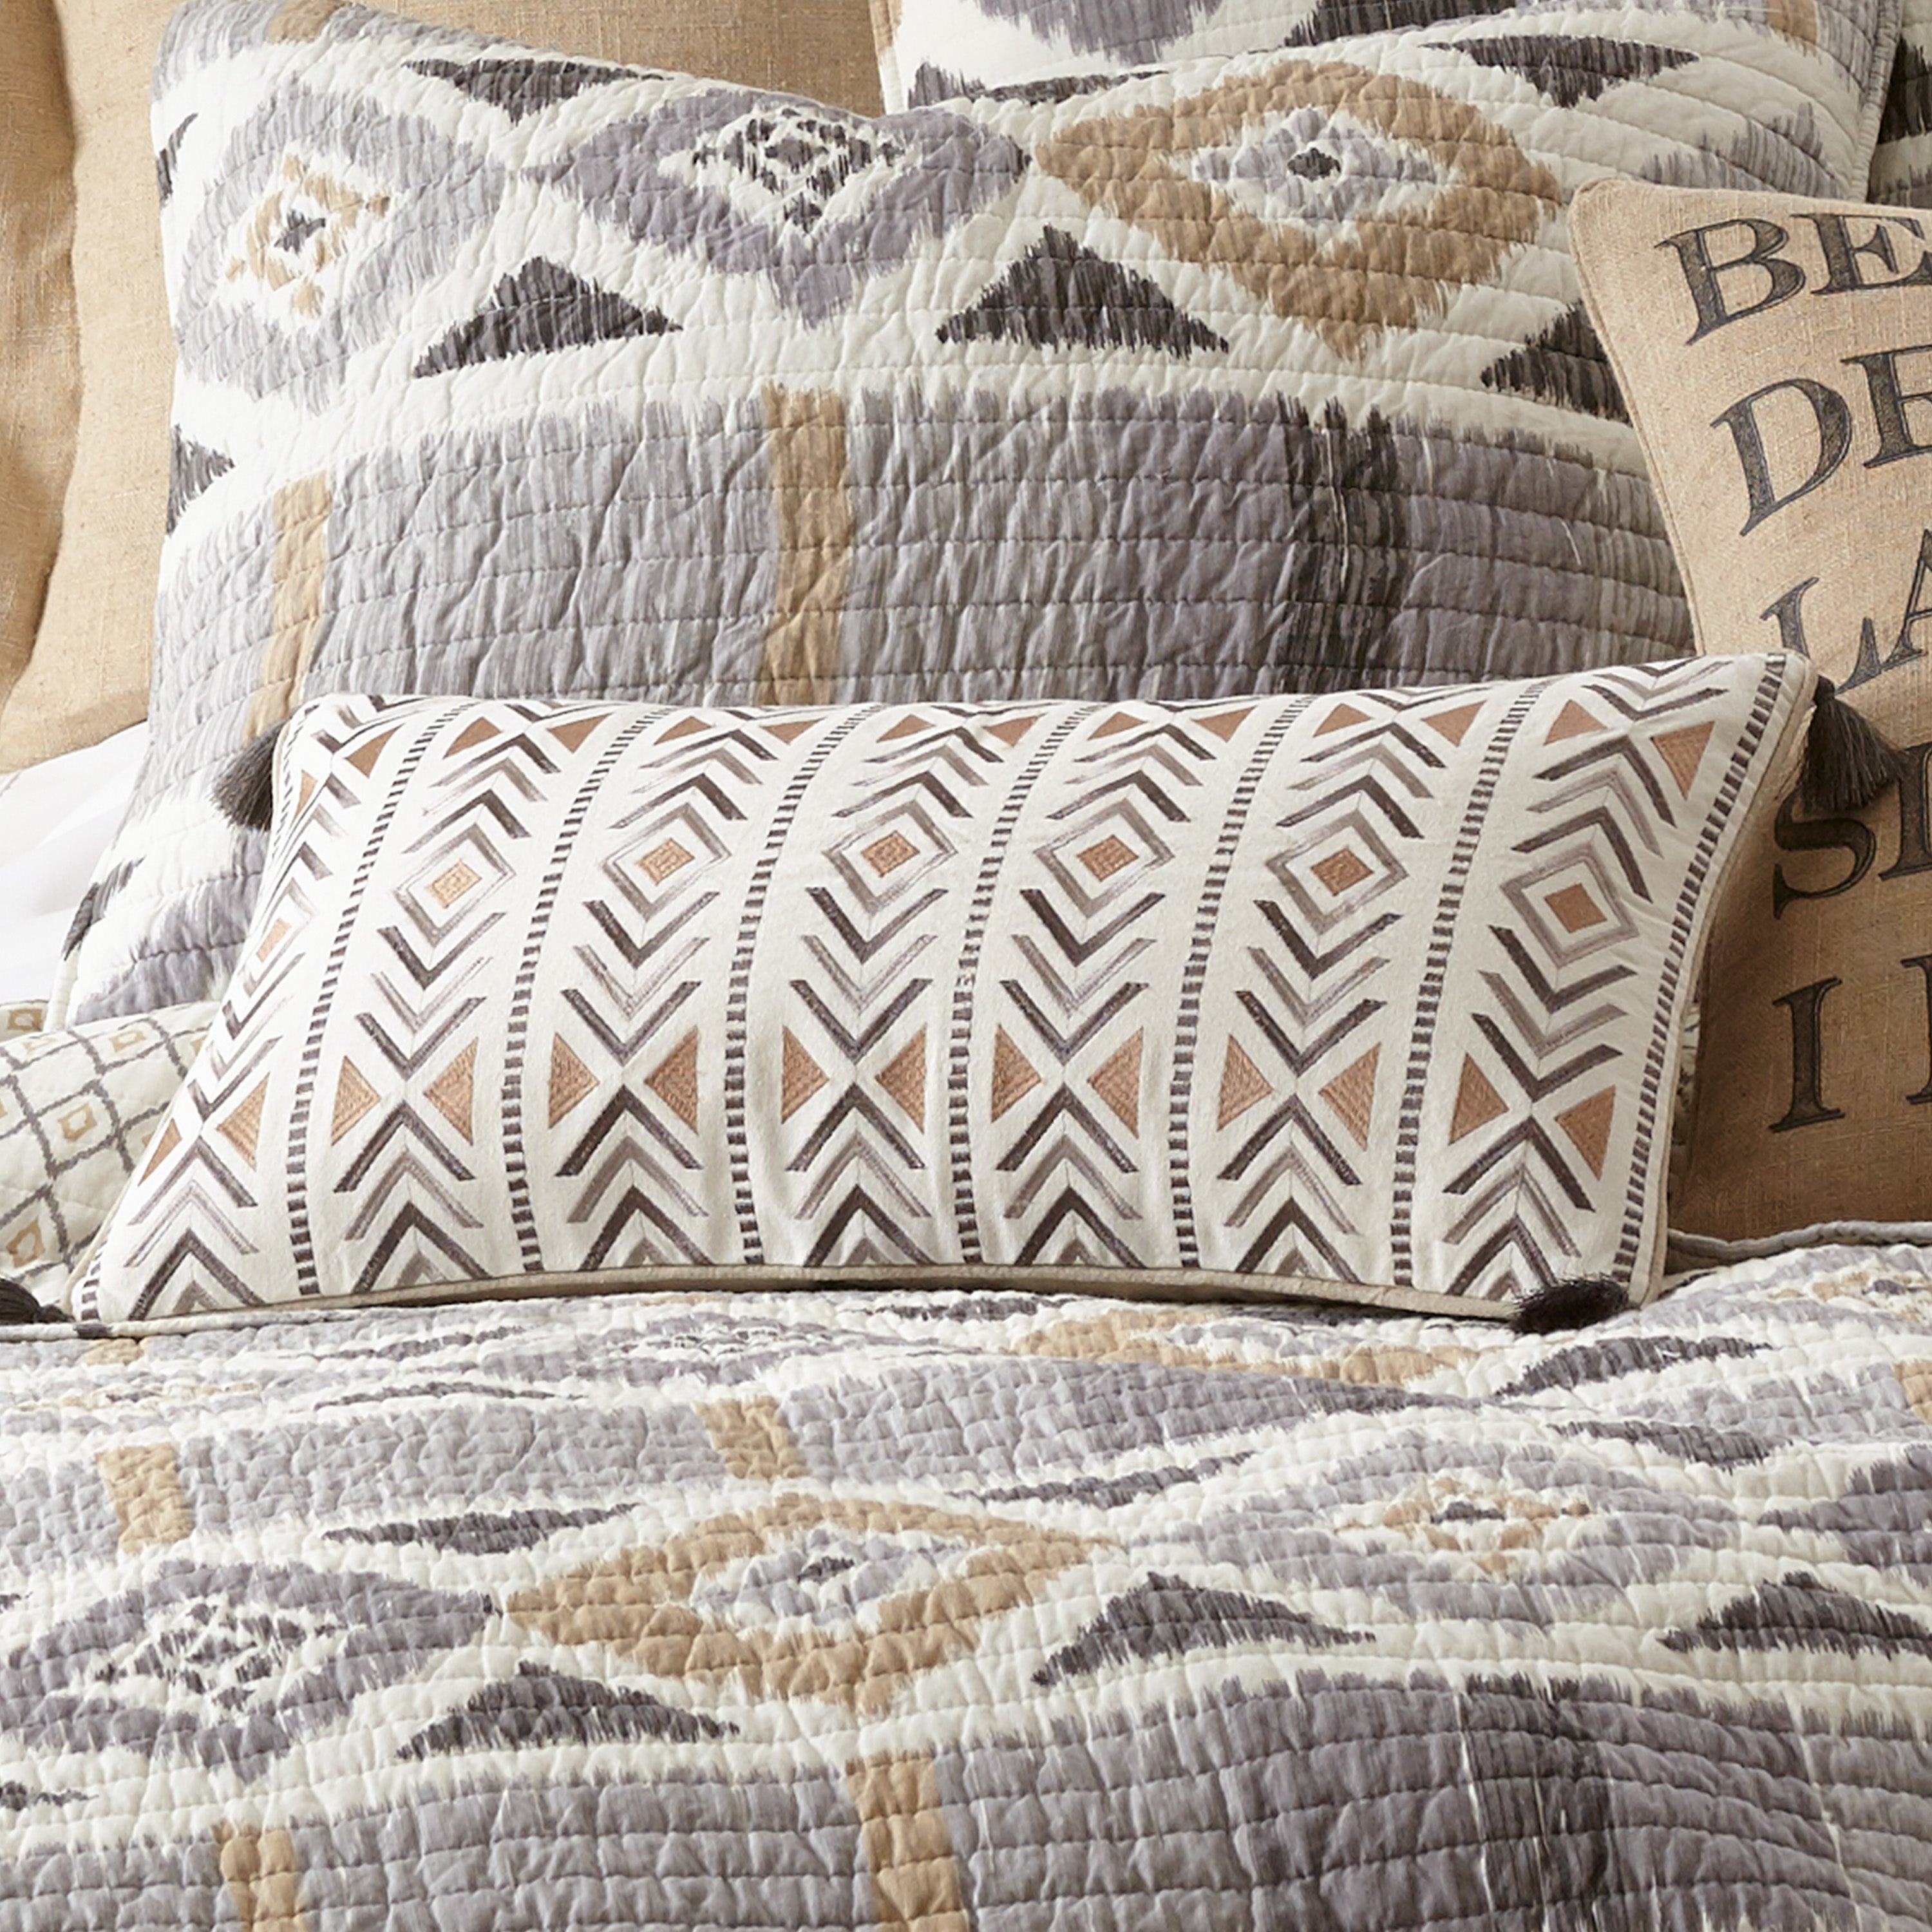 Santa Fe Embroidered with Tassel Pillow